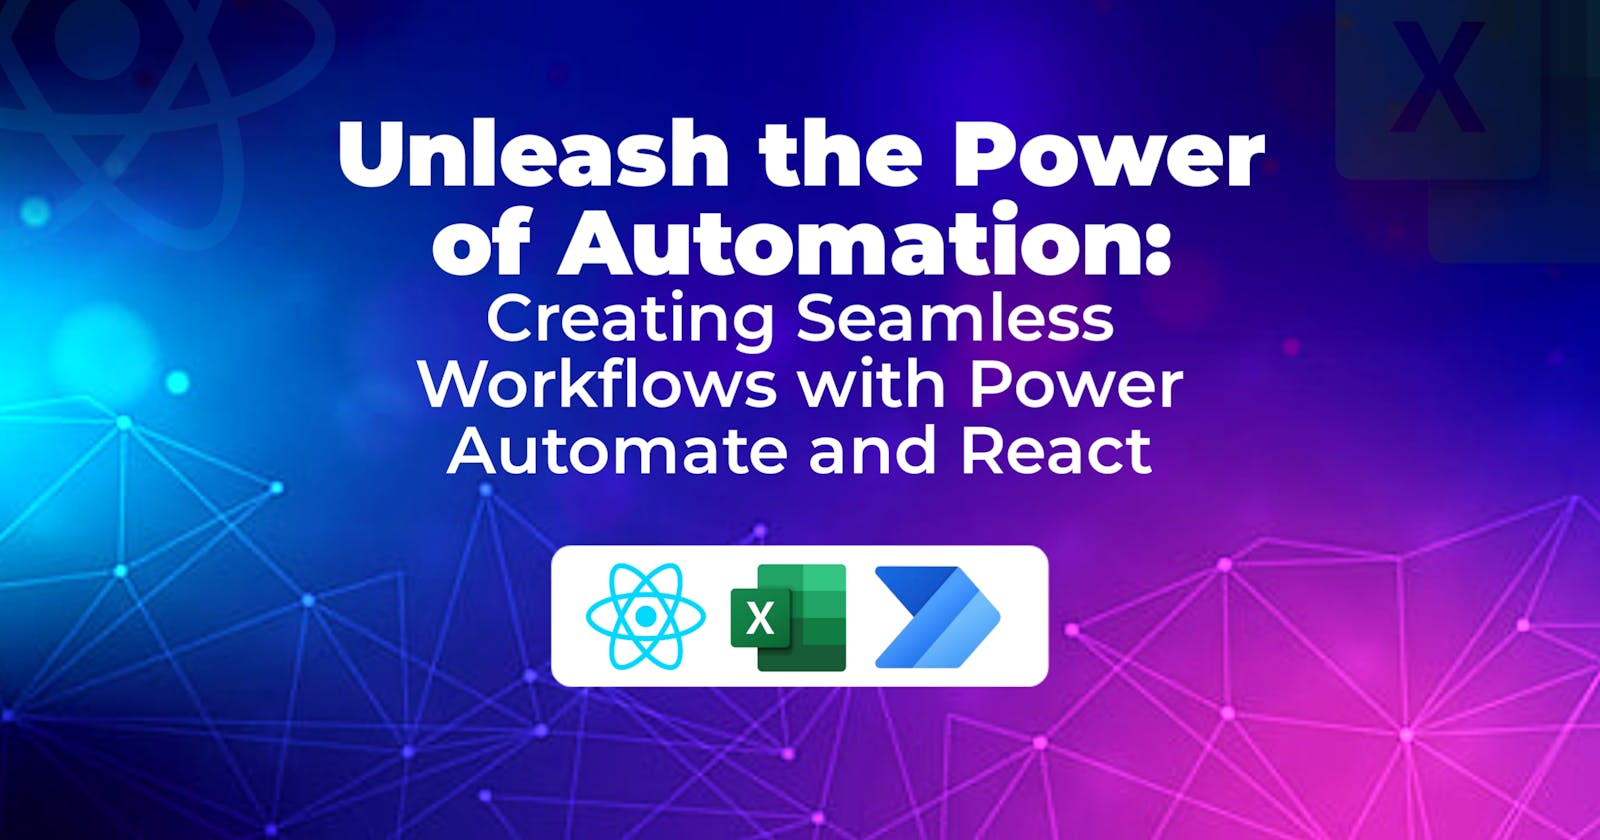 Power Automate and React Integration: Automate Business Processes